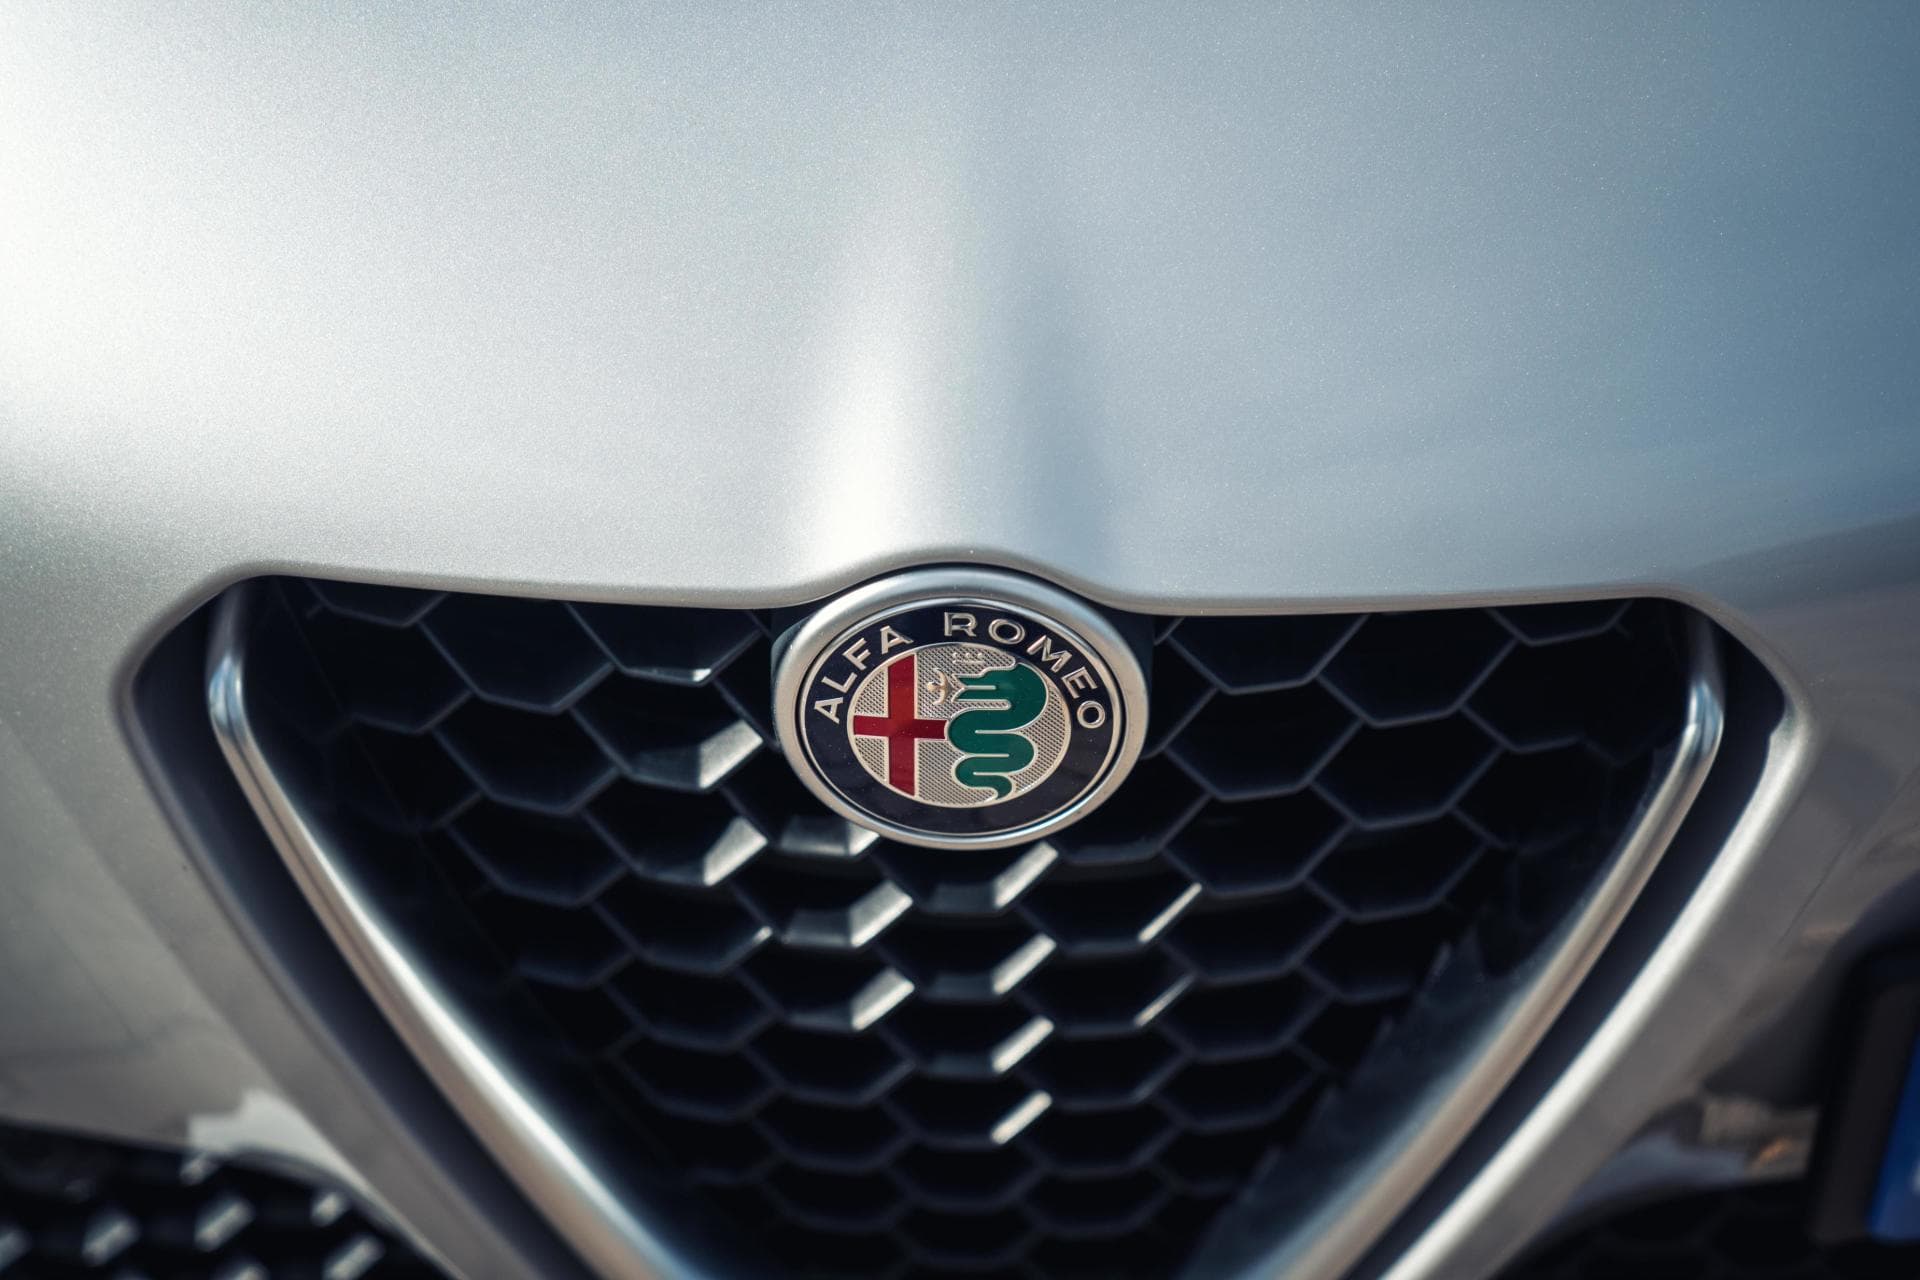 Alfa Romeo welcomes 2023… with the first hint of its new sports car?